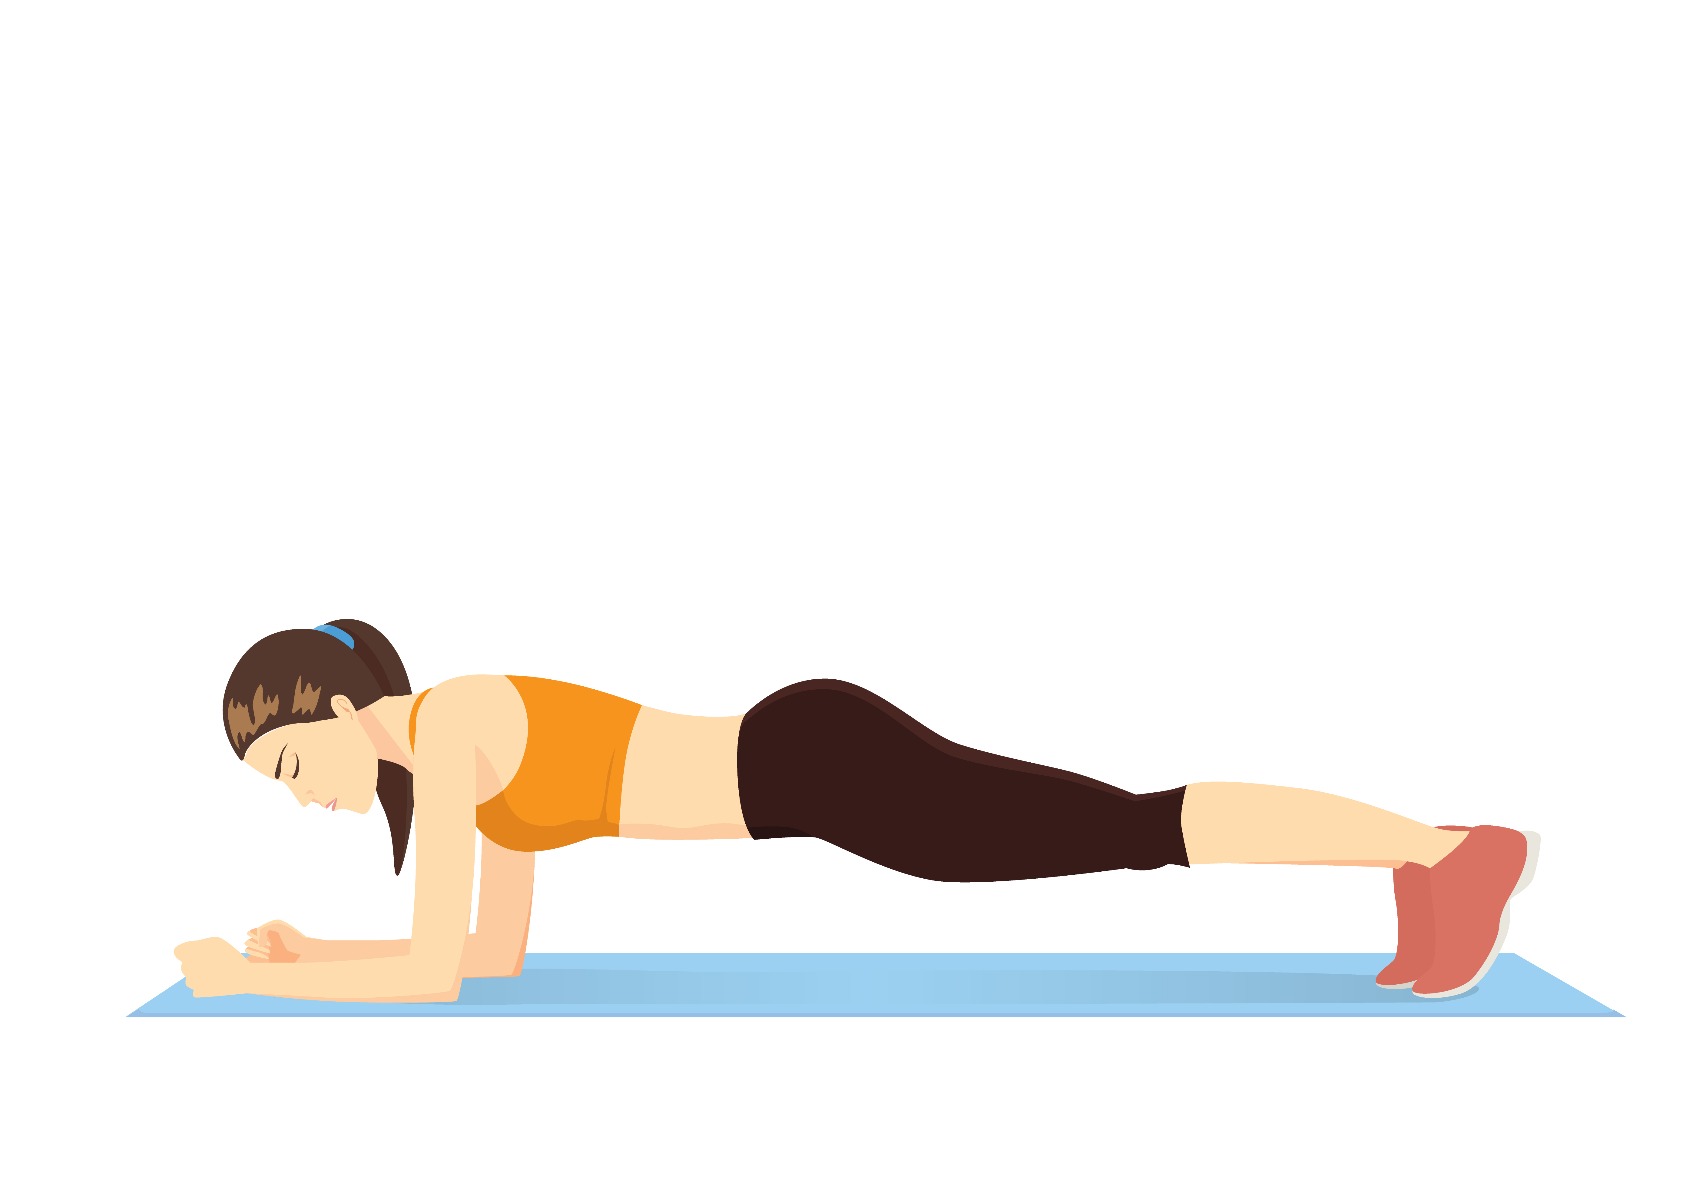 Illustration of a woman holding a plank position on a blue mat